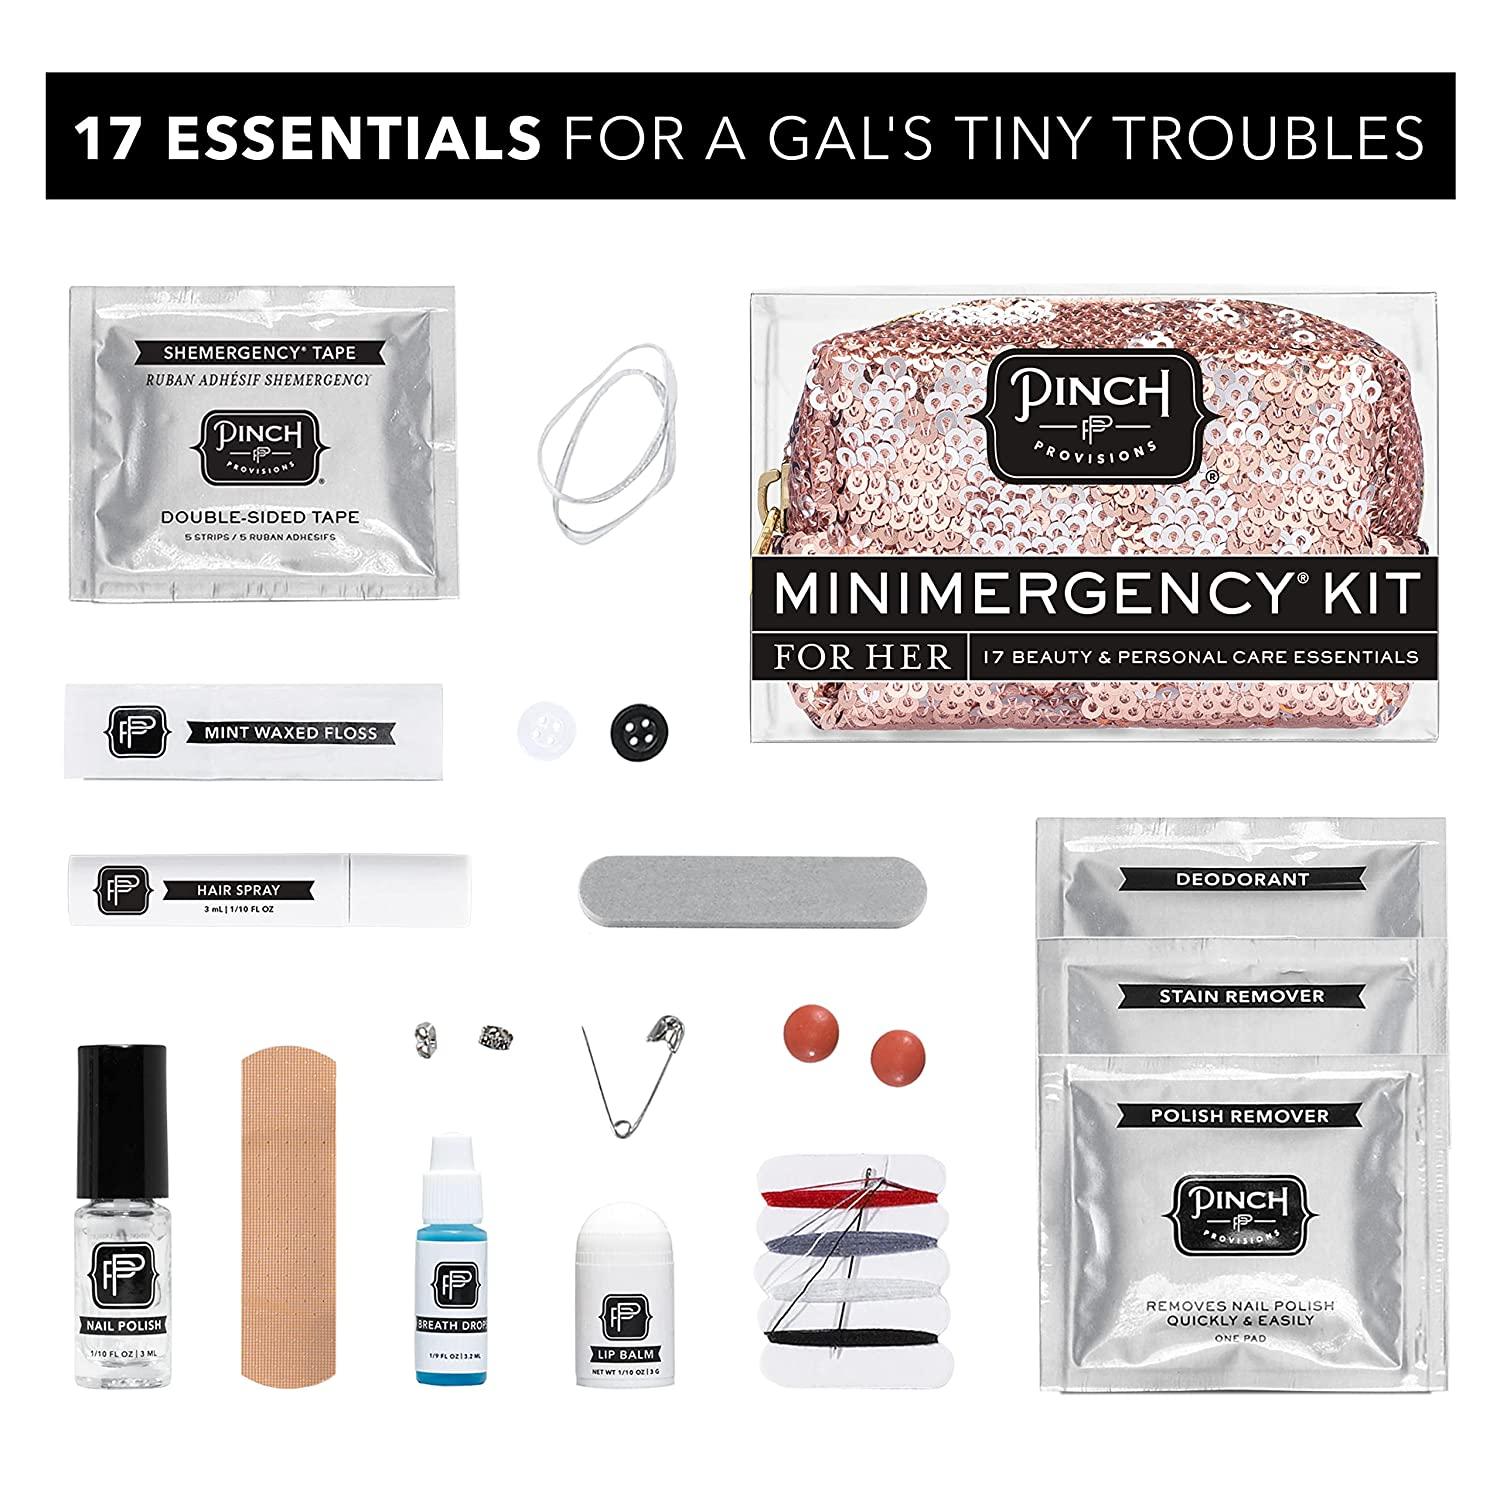 Pinch Provisions Minimergency Kit, For Her, Includes 17 Must-Have